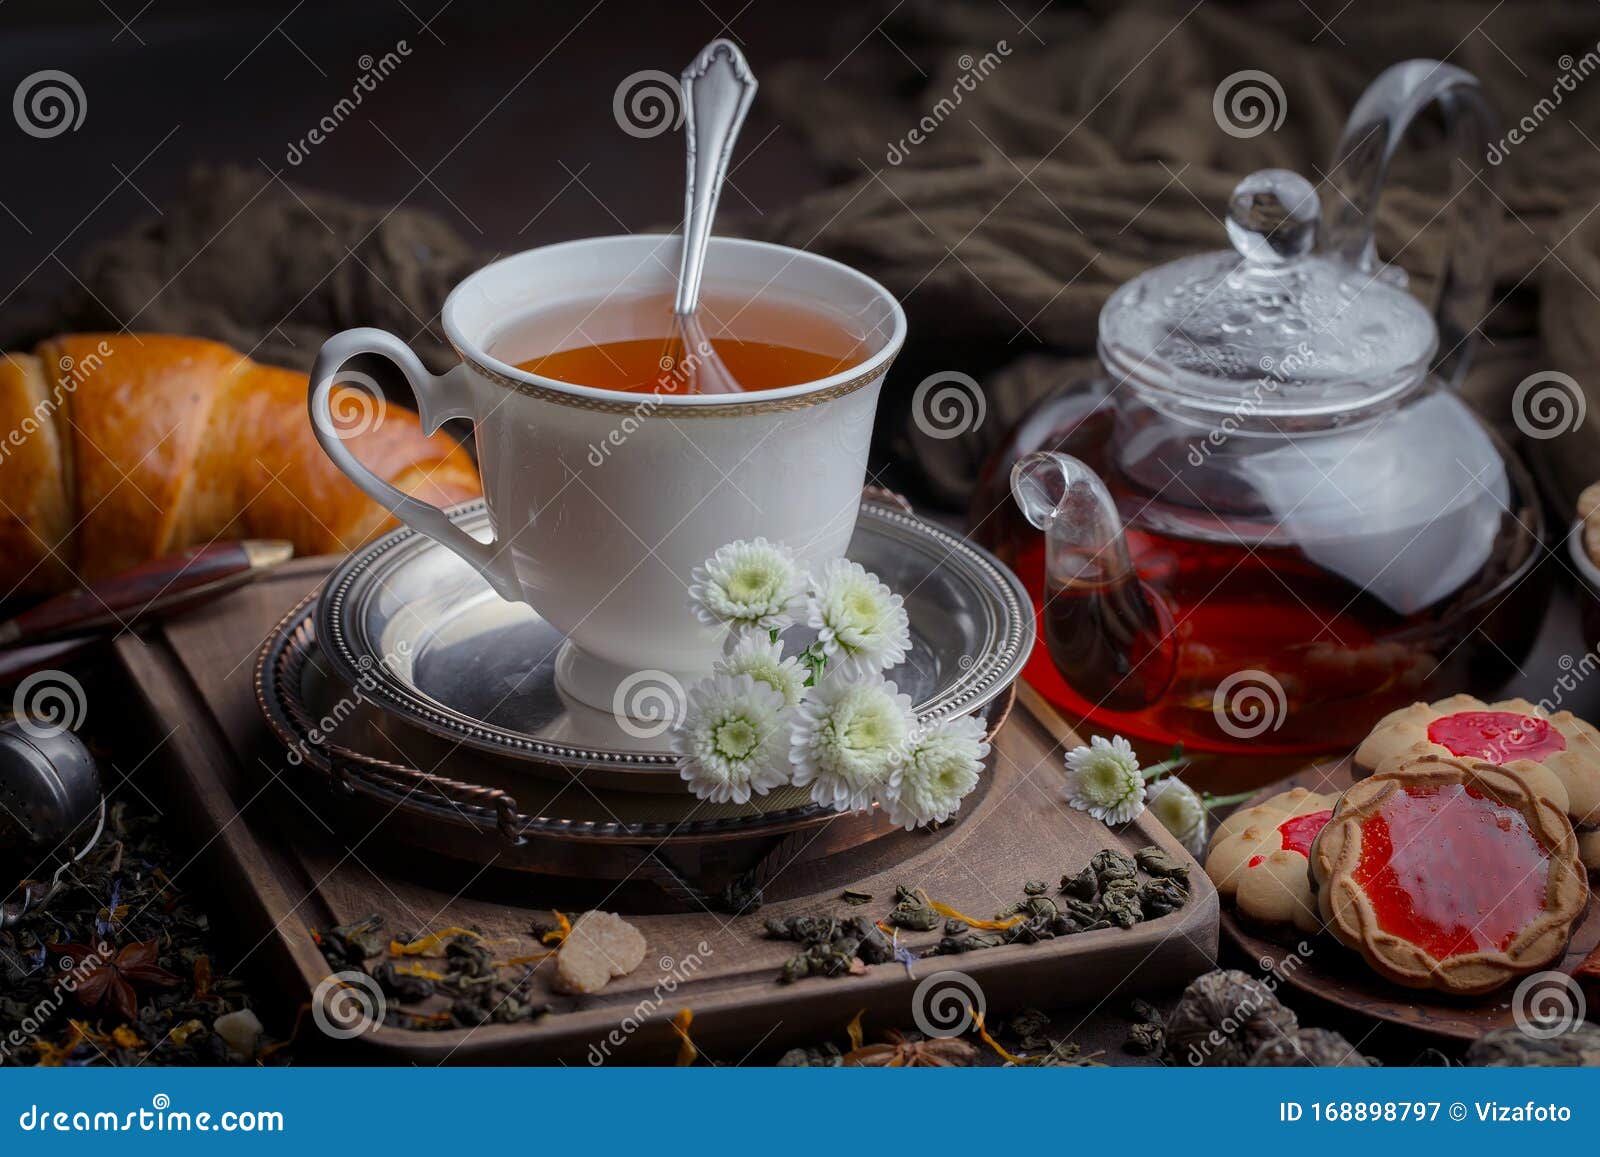 https://thumbs.dreamstime.com/z/hot-tea-cup-hot-tea-cup-composition-accessories-table-old-background-168898797.jpg